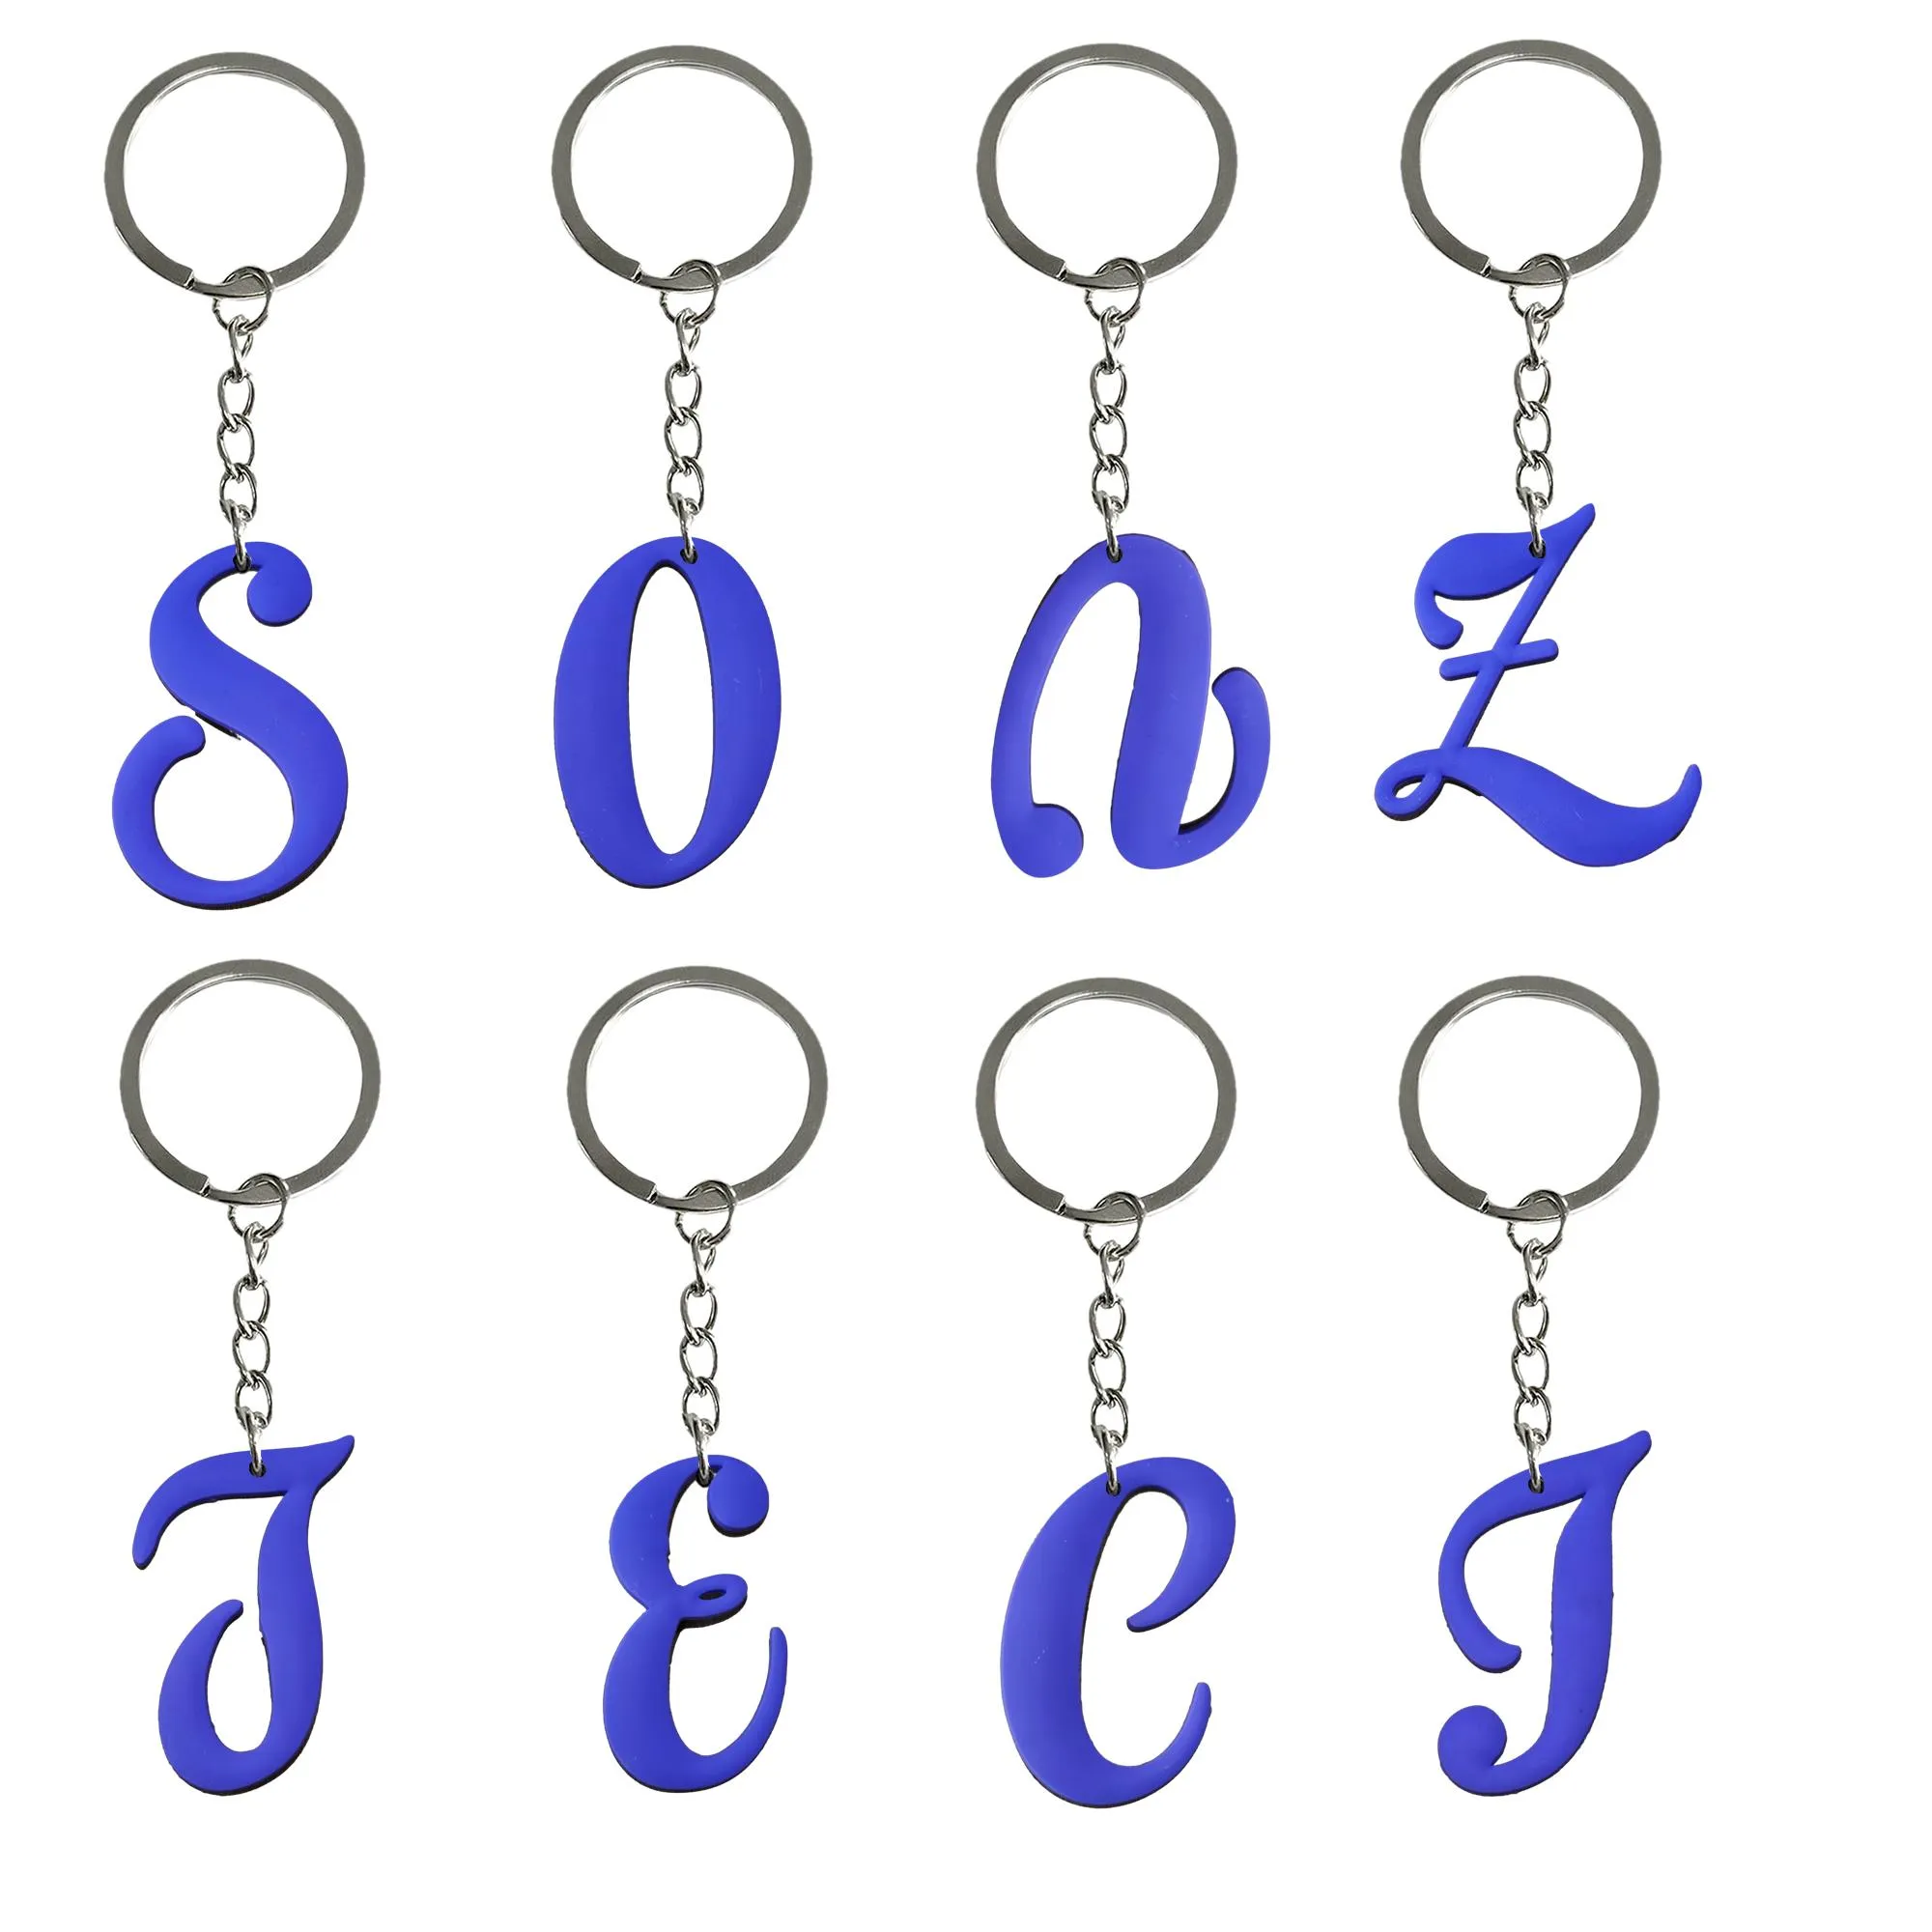 Jewelry Purple Large Letters Keychain Keychains Tags Goodie Bag Stuffer Christmas Gifts And Holiday Charms Keyring For Classroom Schoo Otb0Y